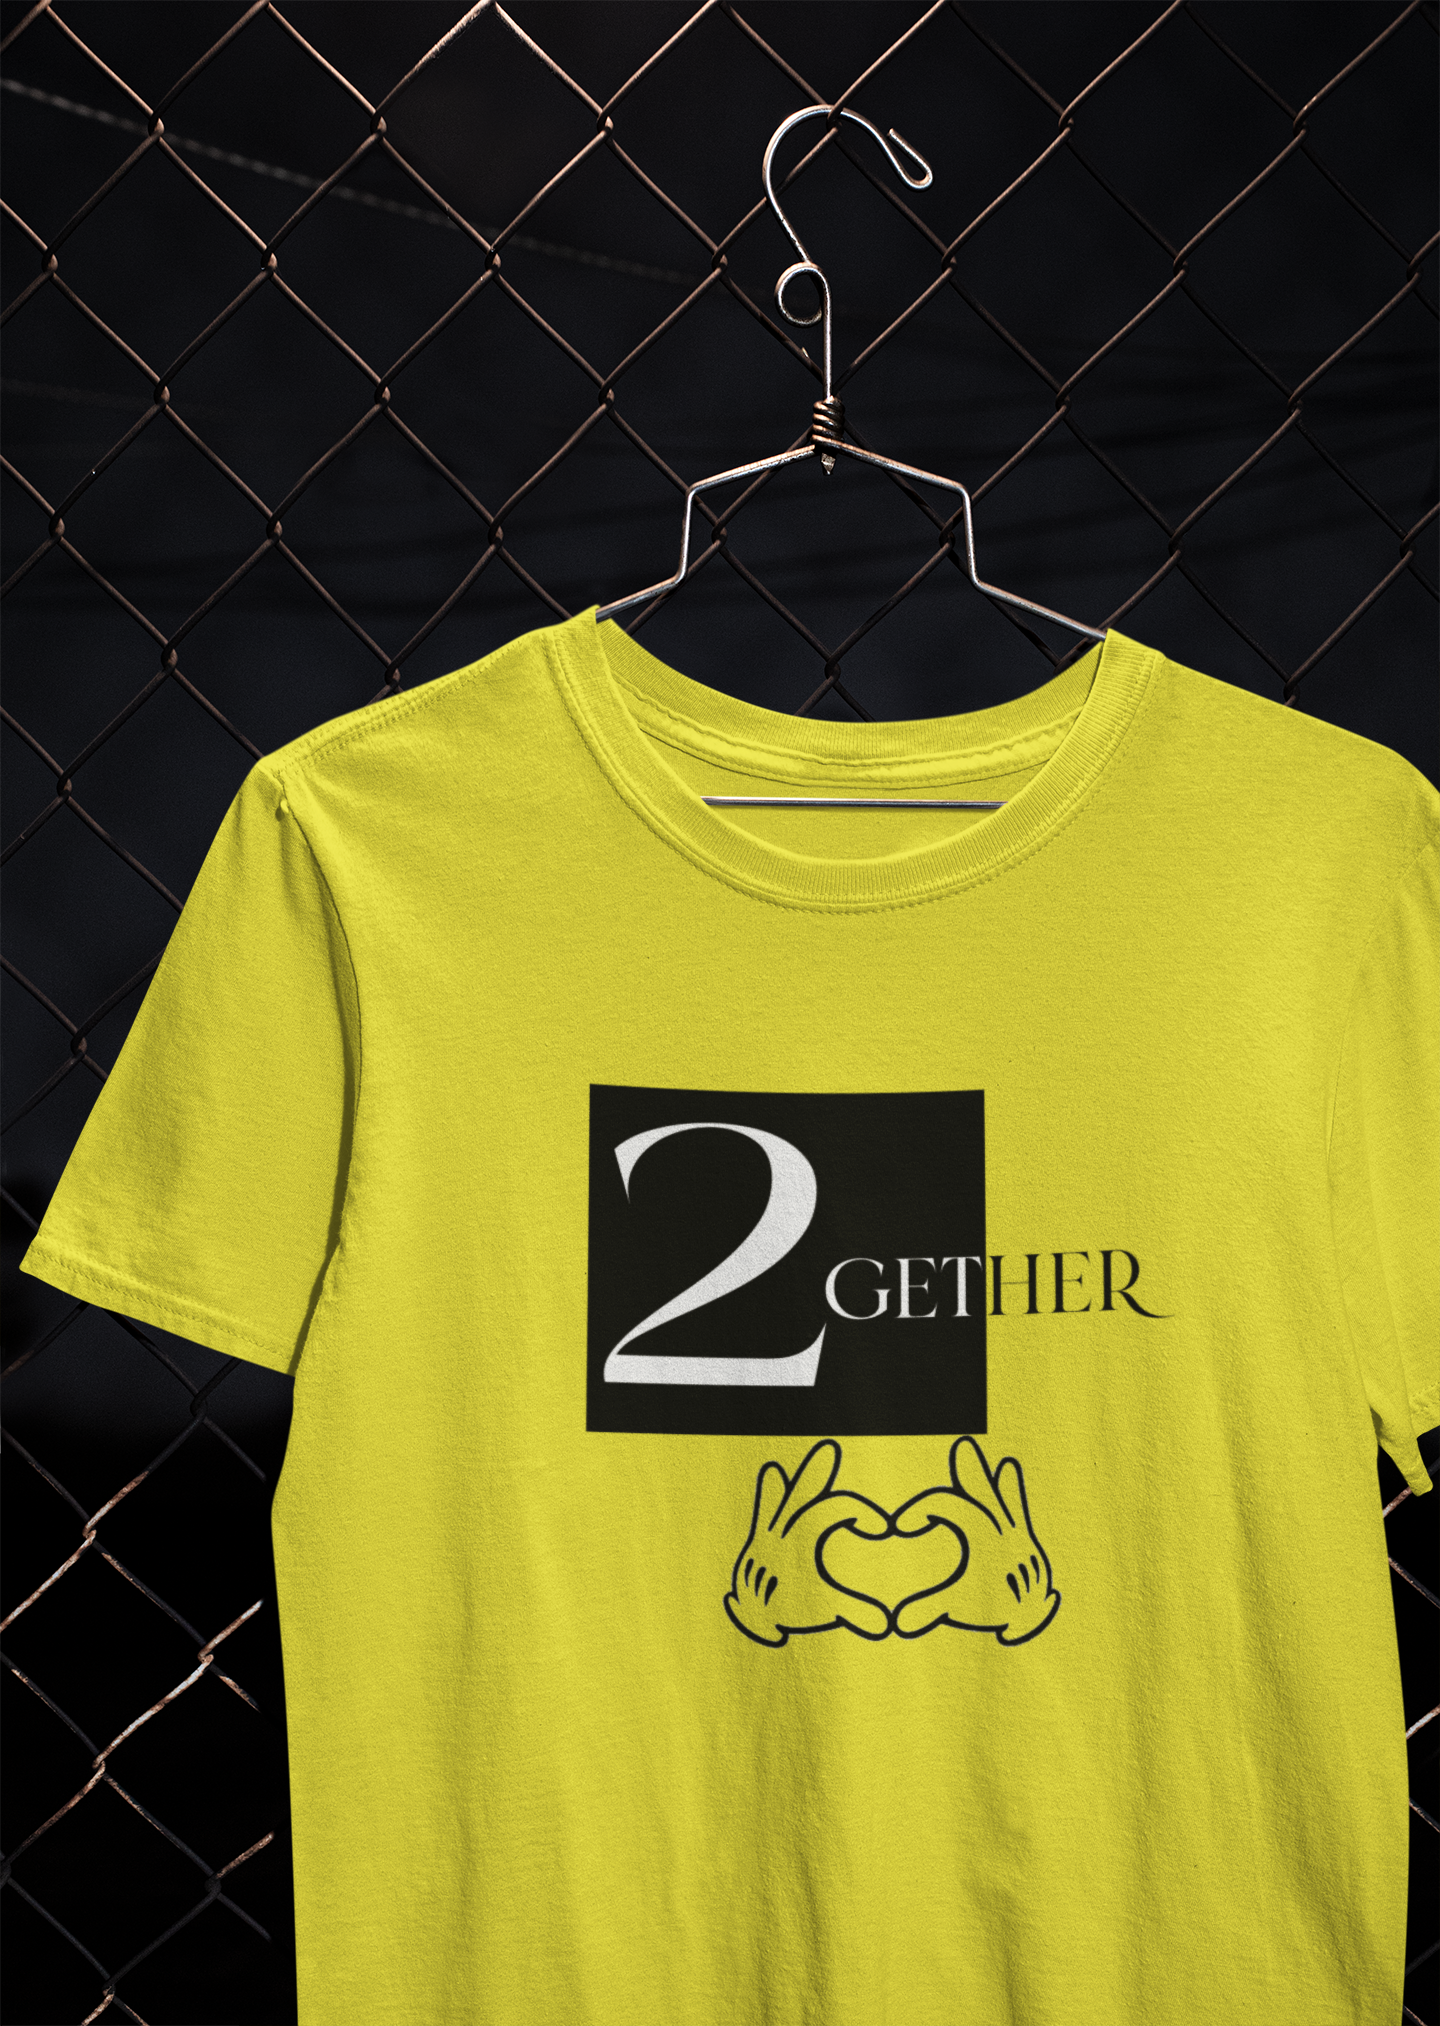 Together Forever Couple Half Sleeves T-Shirts -FunkyTeesClub